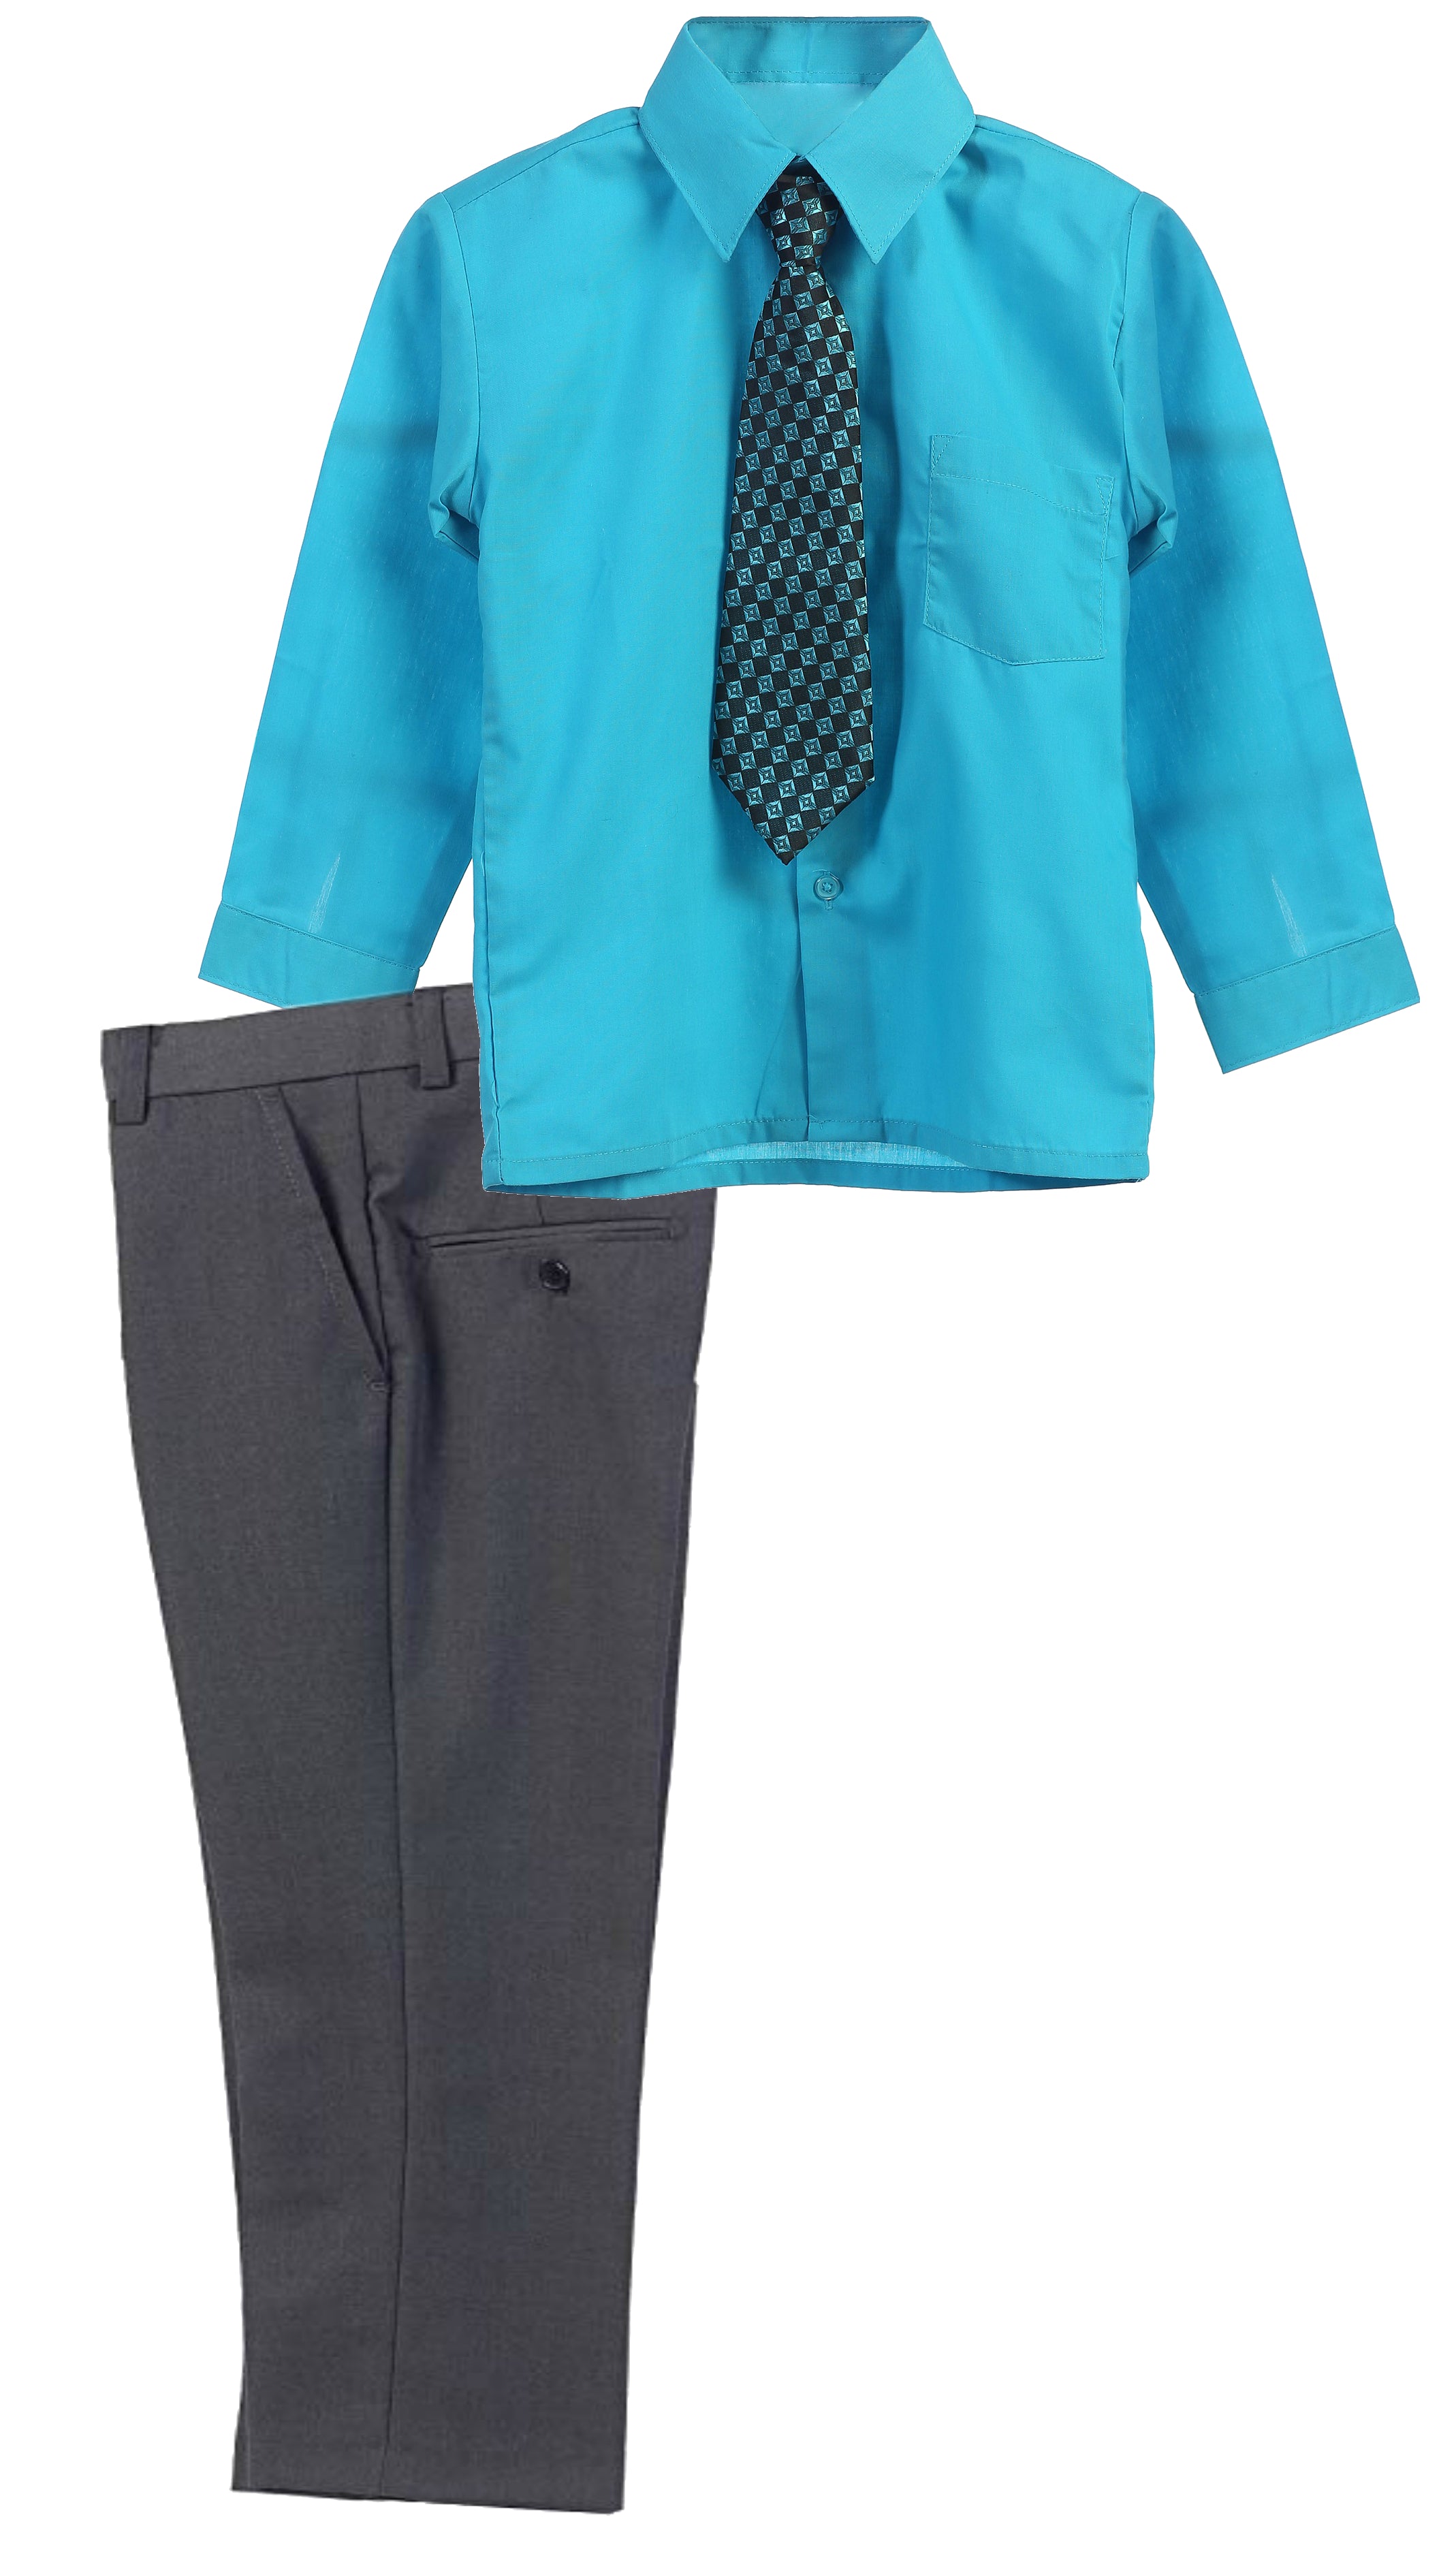 Boys Dress Pants Set With Shirt And Tie -Gray Pants / Turquoise